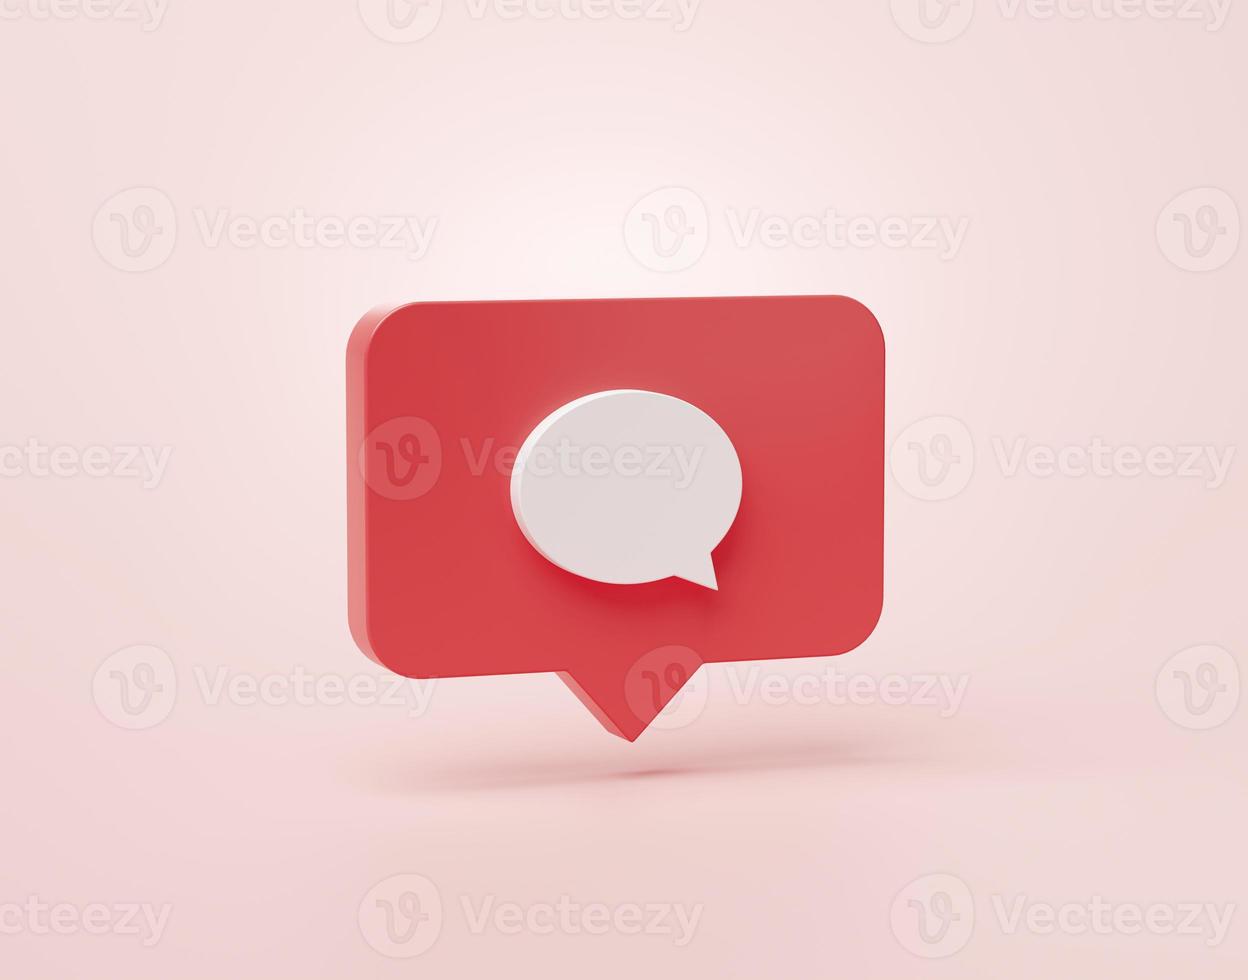 Comment or Message inbox shape social media notification icon in speech bubbles 3d cartoon banner website ui on pink background 3d rendering illustration photo